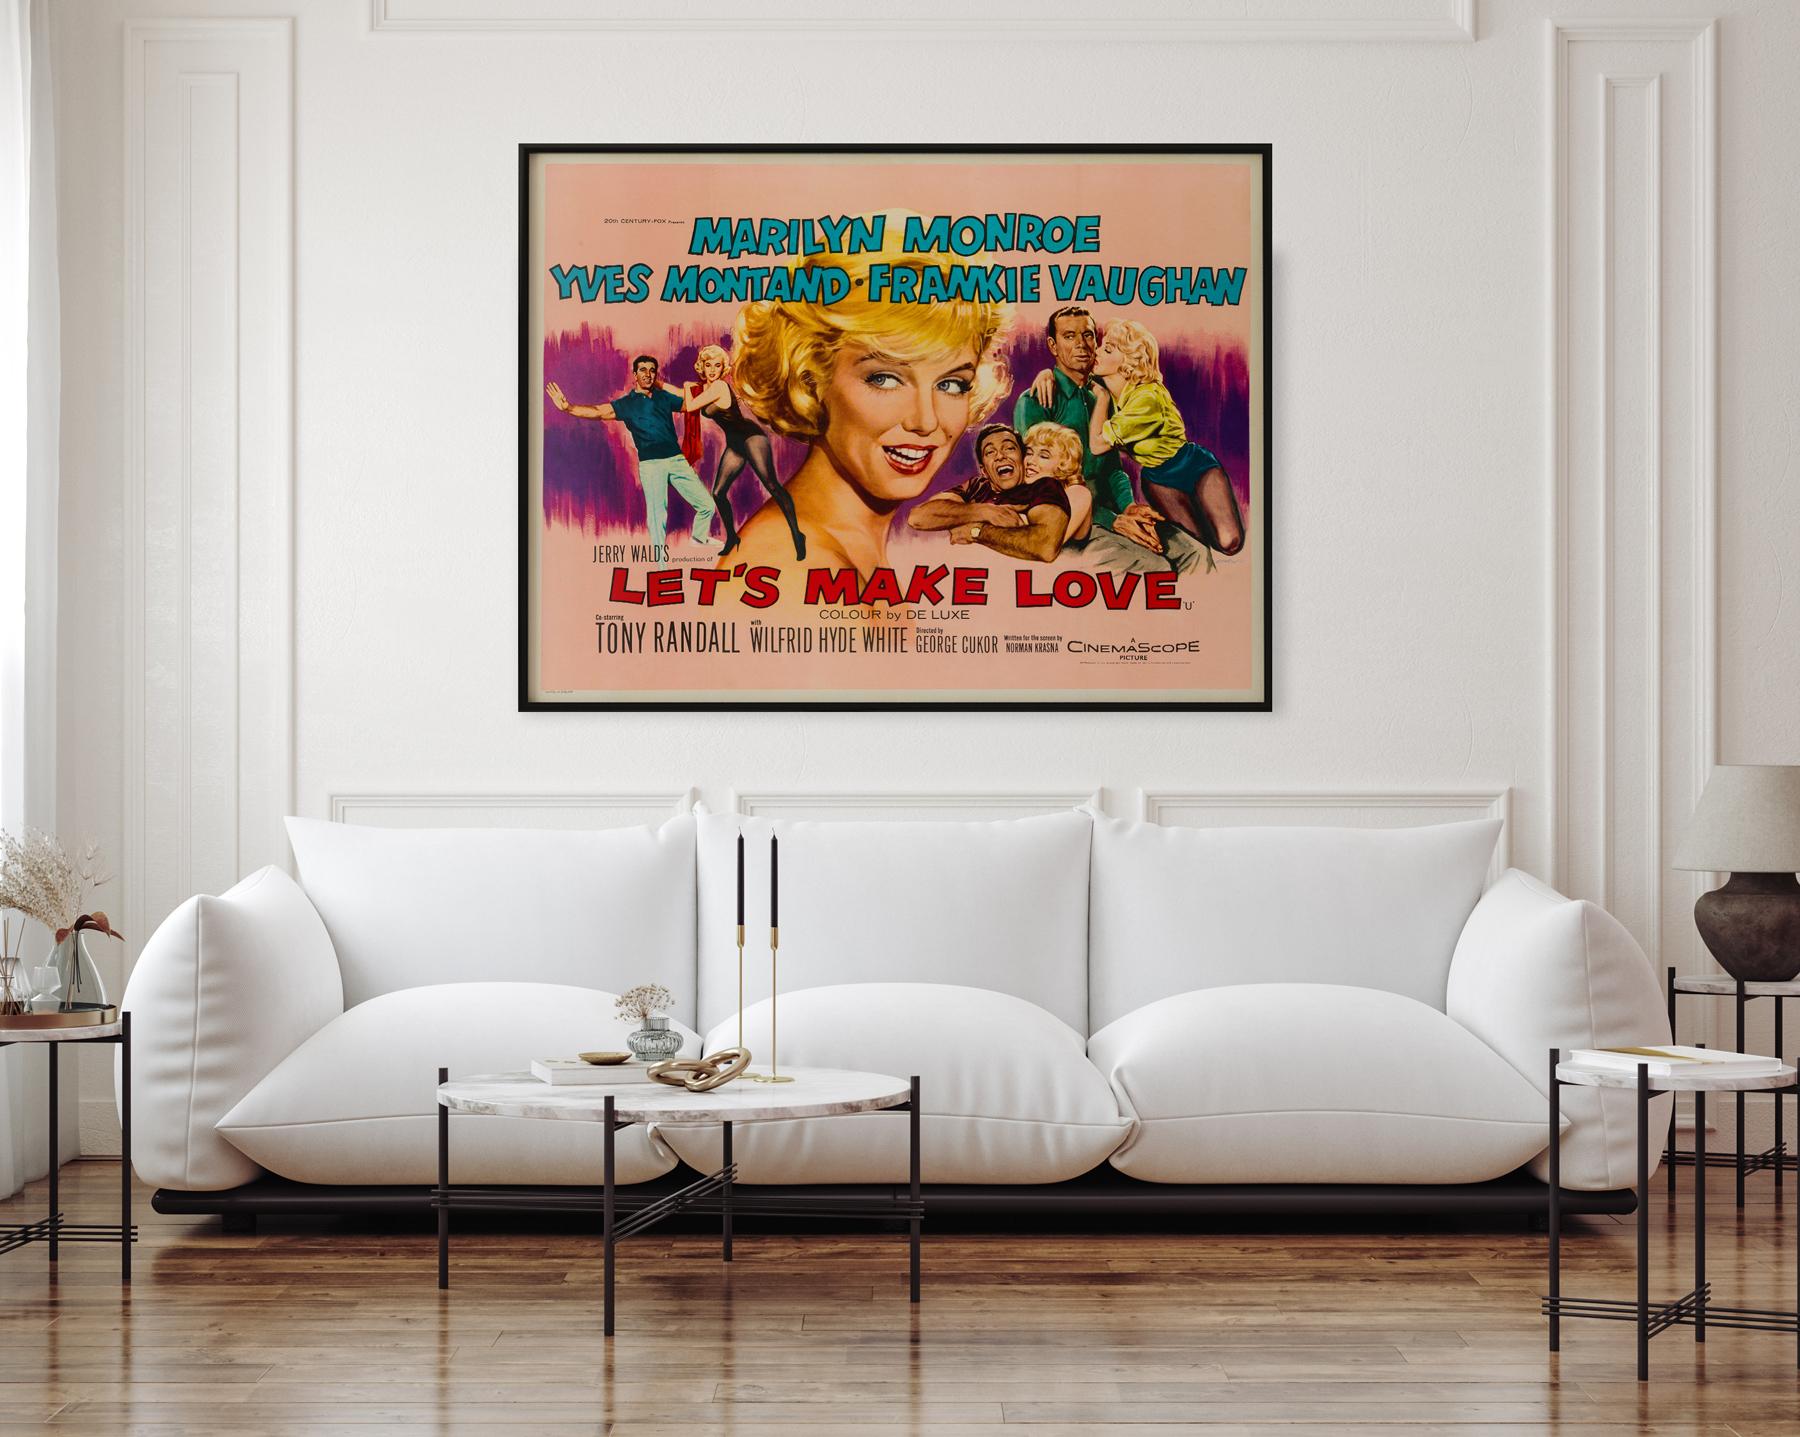 The highly collectable, very rare vintage UK quad for Marilyn Monroe's musical romcom Classic film, Let’s Make Love. Featuring artwork by British designer Tom Chantrell considered to be one of the best images of Monroe. Very rare